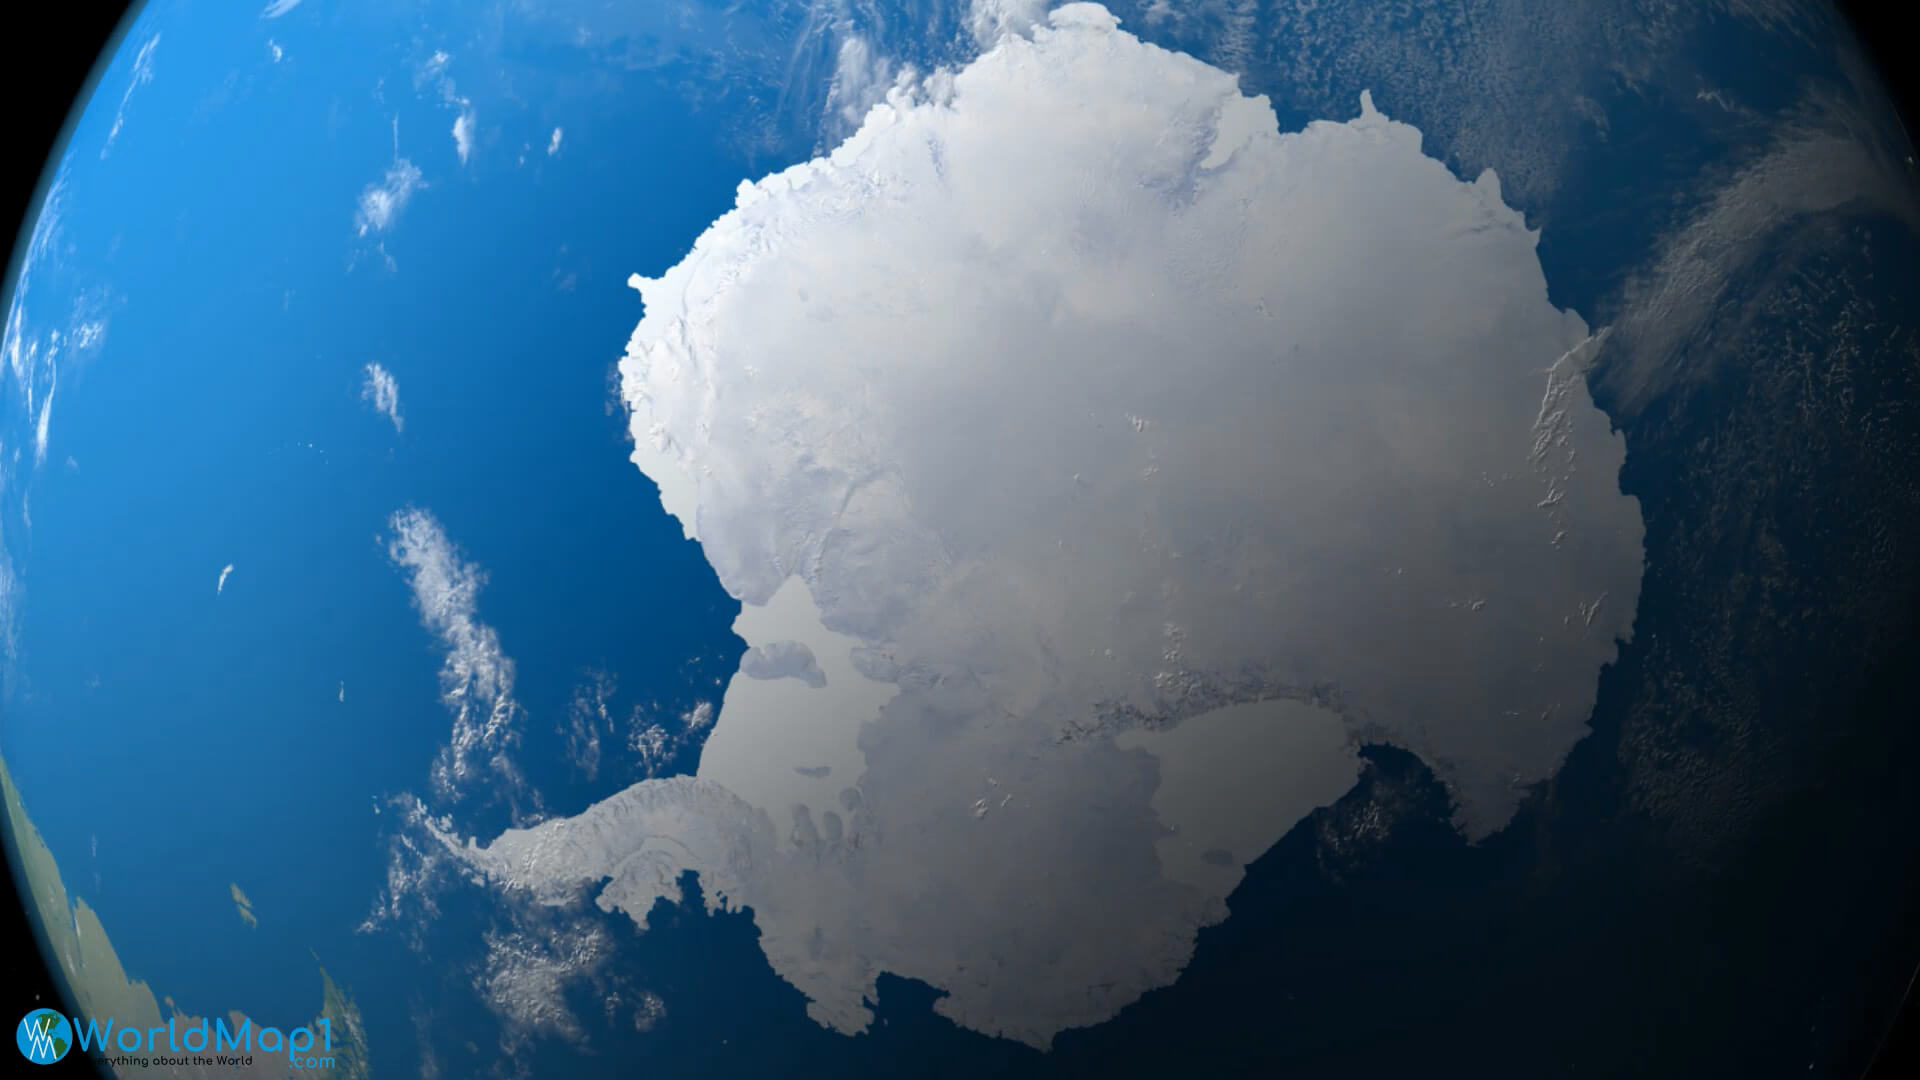 Antarctica Satellite View from Space